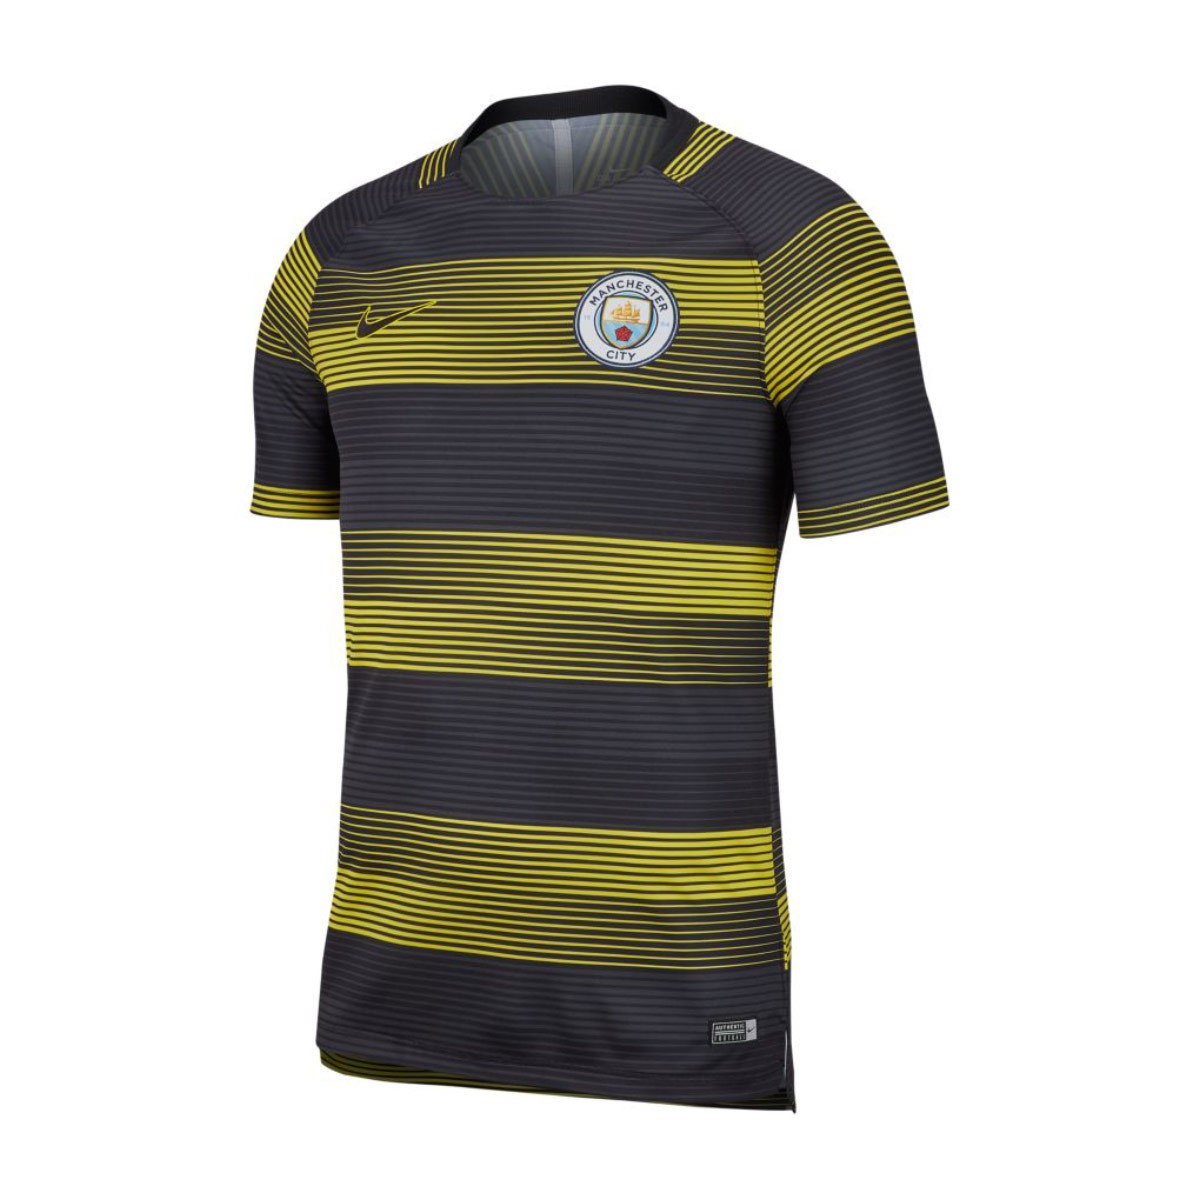 manchester city yellow jersey